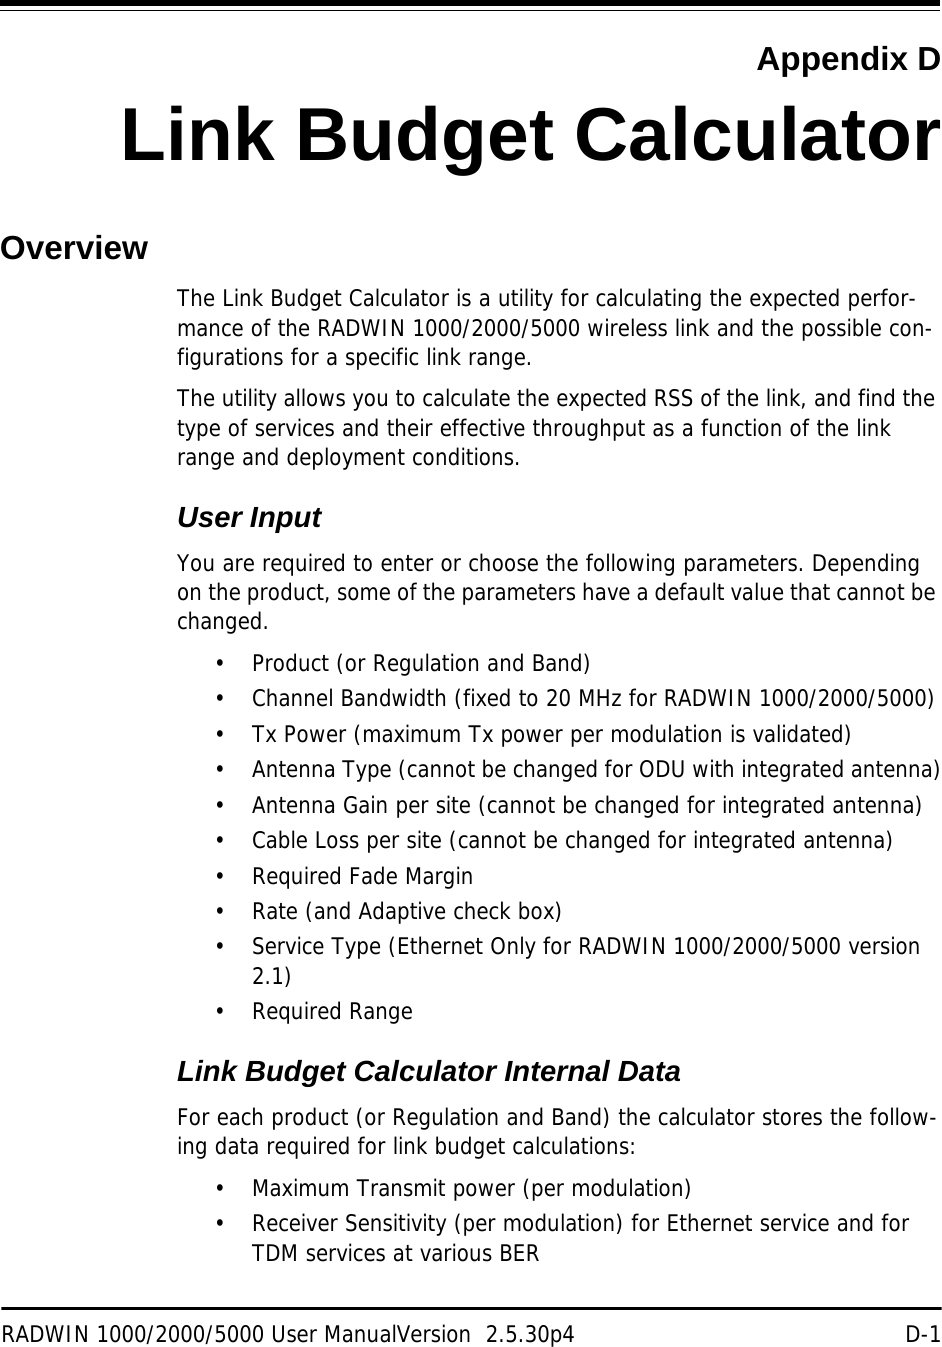 RADWIN 1000/2000/5000 User ManualVersion  2.5.30p4 D-1Appendix DLink Budget CalculatorOverviewThe Link Budget Calculator is a utility for calculating the expected perfor-mance of the RADWIN 1000/2000/5000 wireless link and the possible con-figurations for a specific link range.The utility allows you to calculate the expected RSS of the link, and find the type of services and their effective throughput as a function of the link range and deployment conditions.User InputYou are required to enter or choose the following parameters. Depending on the product, some of the parameters have a default value that cannot be changed. • Product (or Regulation and Band)• Channel Bandwidth (fixed to 20 MHz for RADWIN 1000/2000/5000)• Tx Power (maximum Tx power per modulation is validated)• Antenna Type (cannot be changed for ODU with integrated antenna)• Antenna Gain per site (cannot be changed for integrated antenna)• Cable Loss per site (cannot be changed for integrated antenna)• Required Fade Margin• Rate (and Adaptive check box)• Service Type (Ethernet Only for RADWIN 1000/2000/5000 version 2.1)• Required RangeLink Budget Calculator Internal DataFor each product (or Regulation and Band) the calculator stores the follow-ing data required for link budget calculations:• Maximum Transmit power (per modulation)• Receiver Sensitivity (per modulation) for Ethernet service and for TDM services at various BER